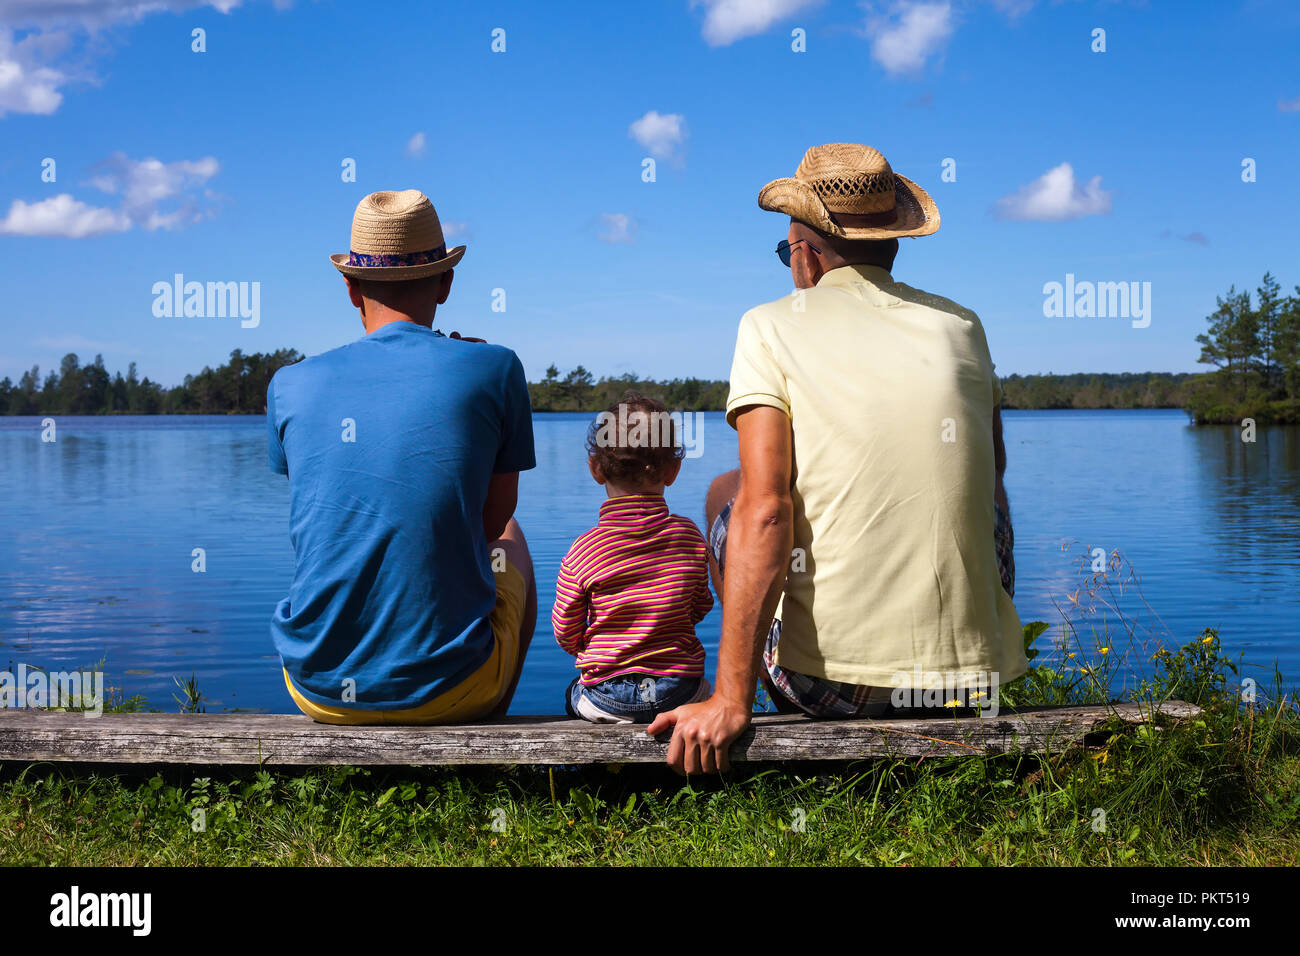 Two men and a toddler at a lake during nice summer day Stock Photo